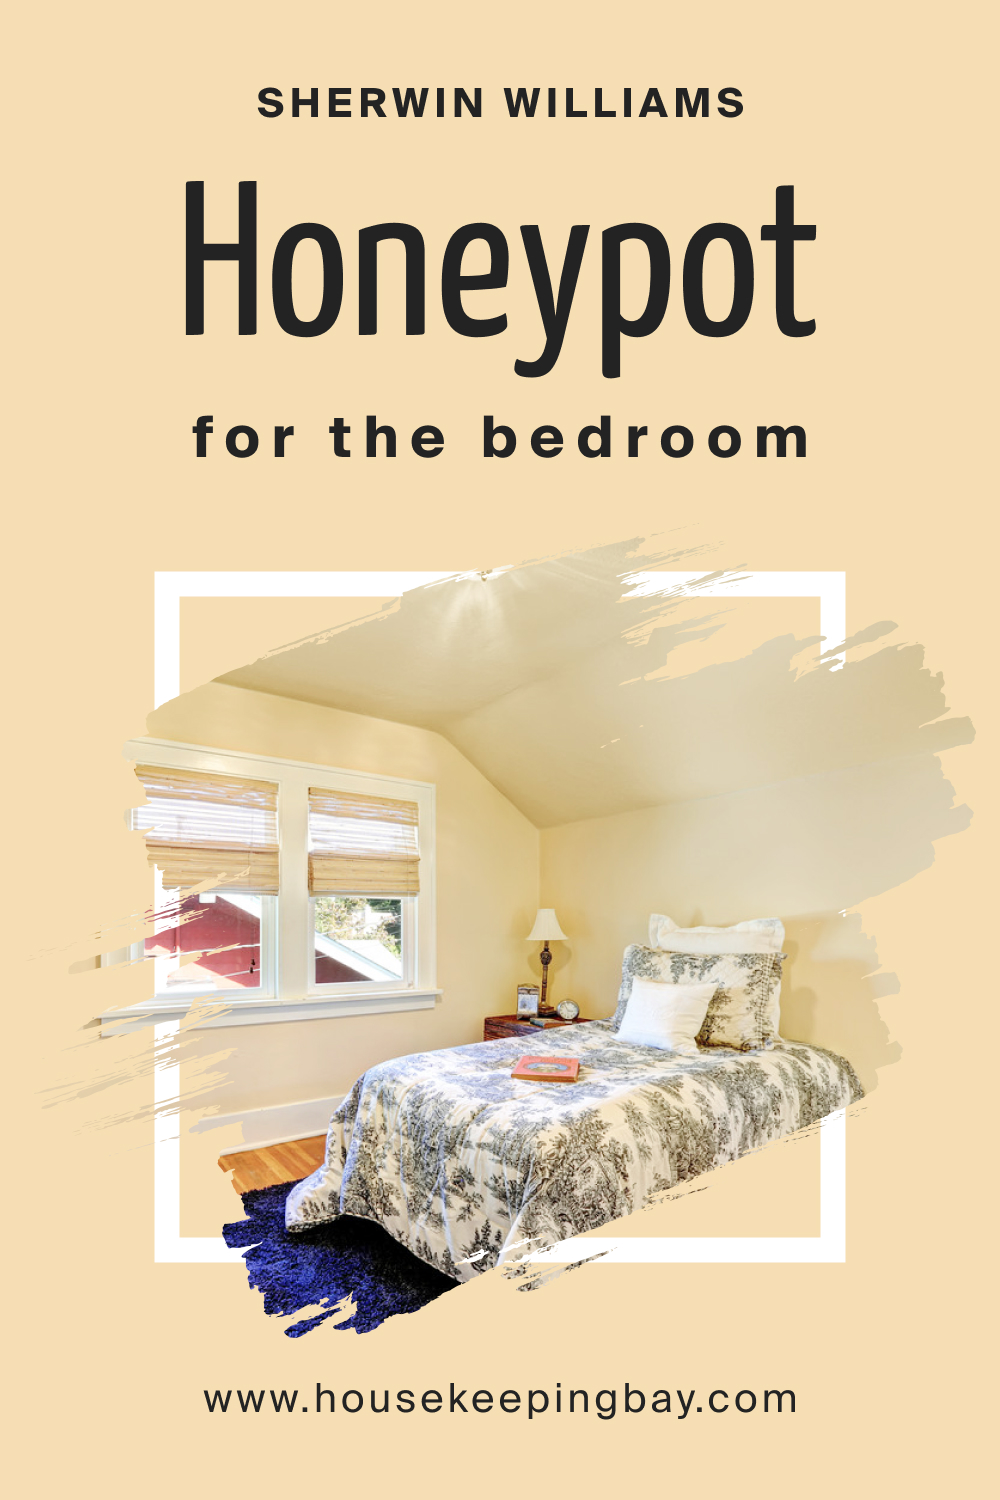 Sherwin Williams. SW 9663 Honeypot For the bedroom